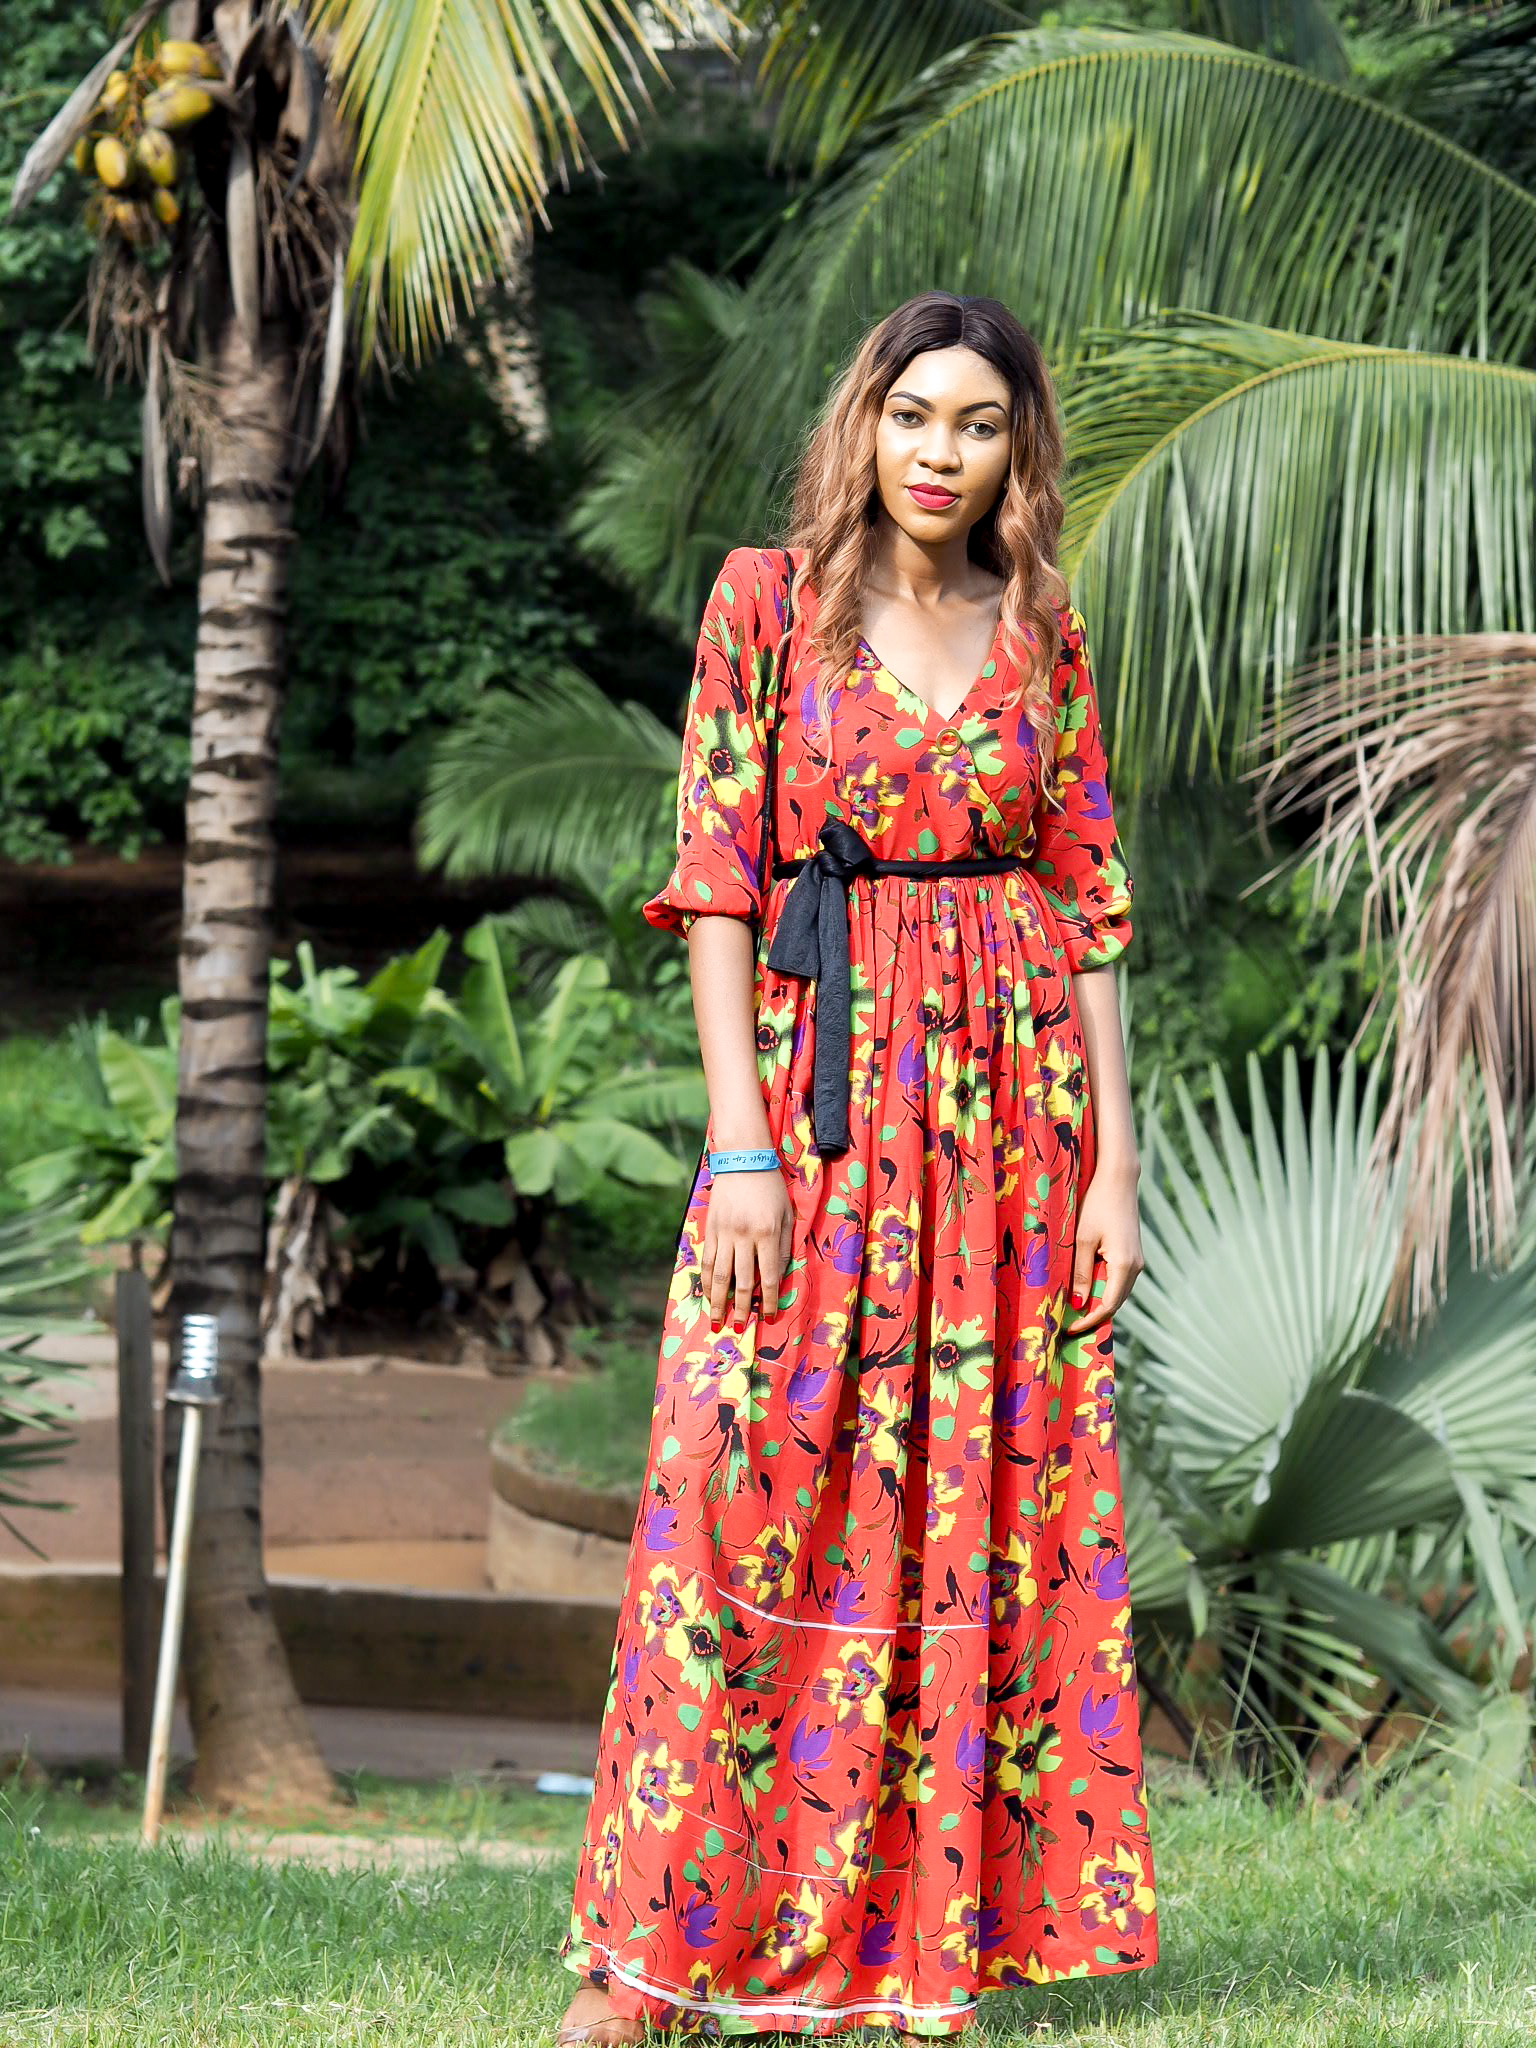 Floral maxi dress at Lafiya lifestyle expo 2018 in Abuja by She leads Africa